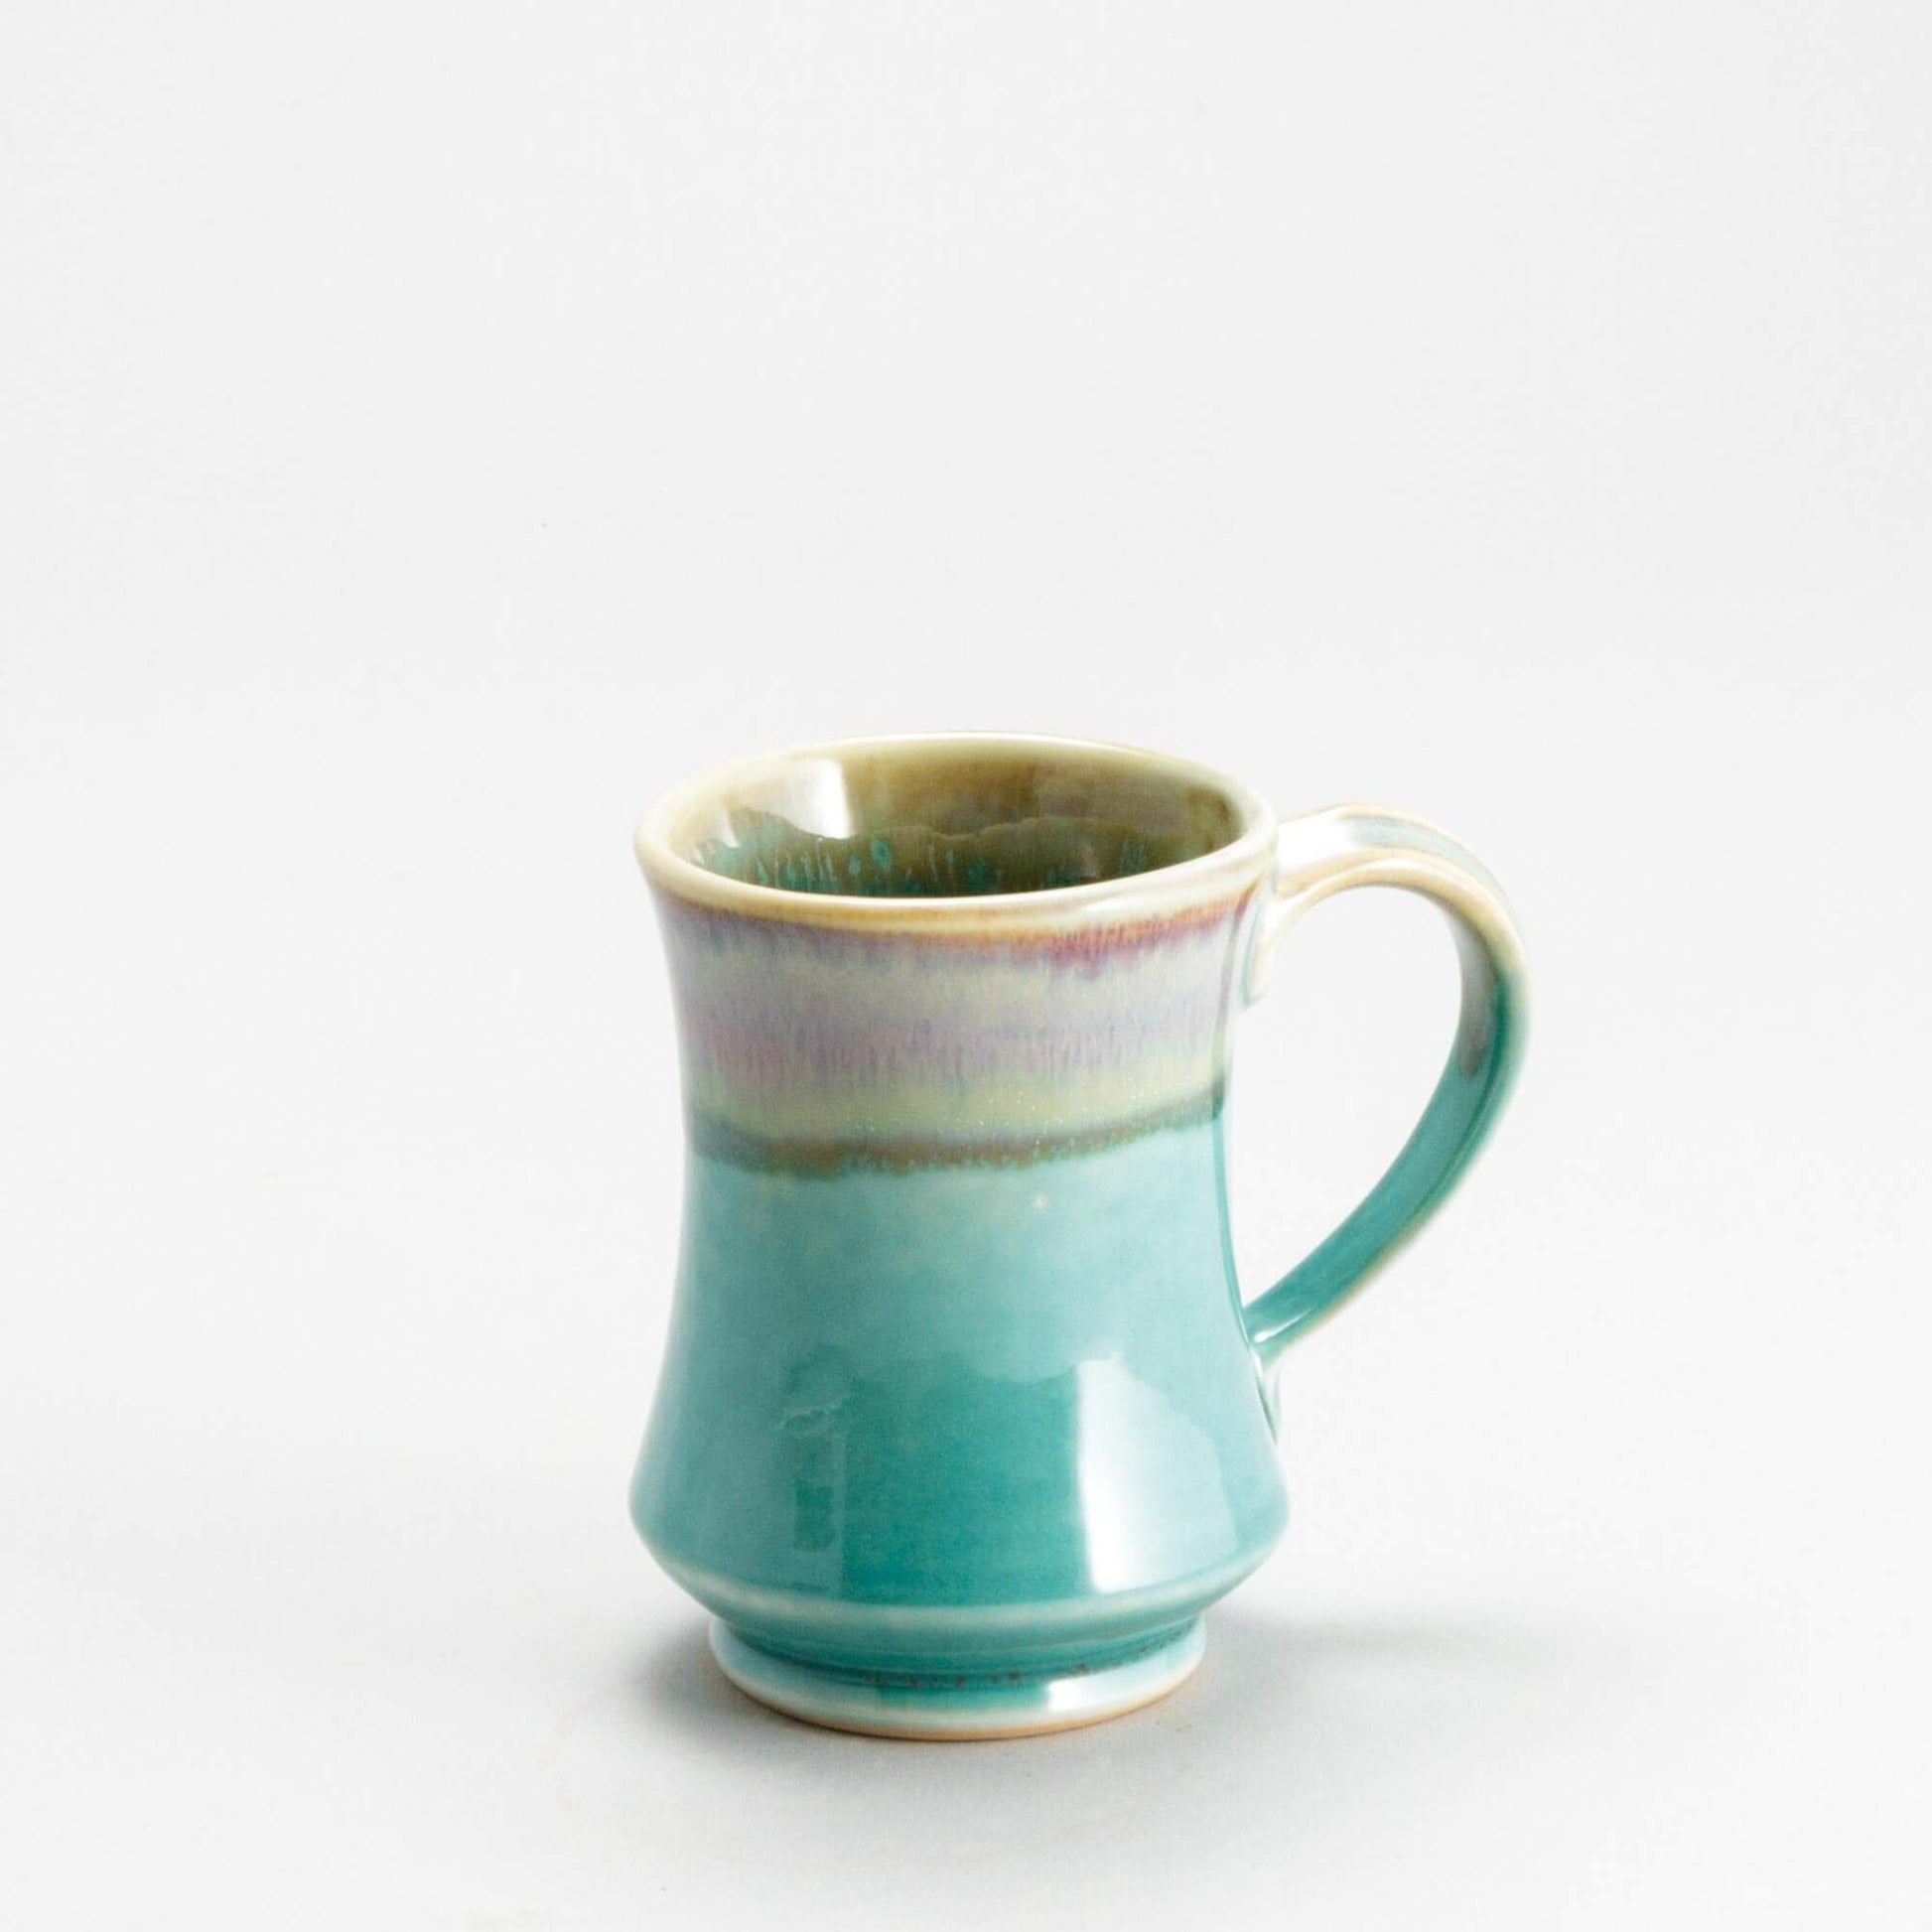 Handmade Pottery Pedestal Mug made by Georgetown Pottery in Maine Green Oribe